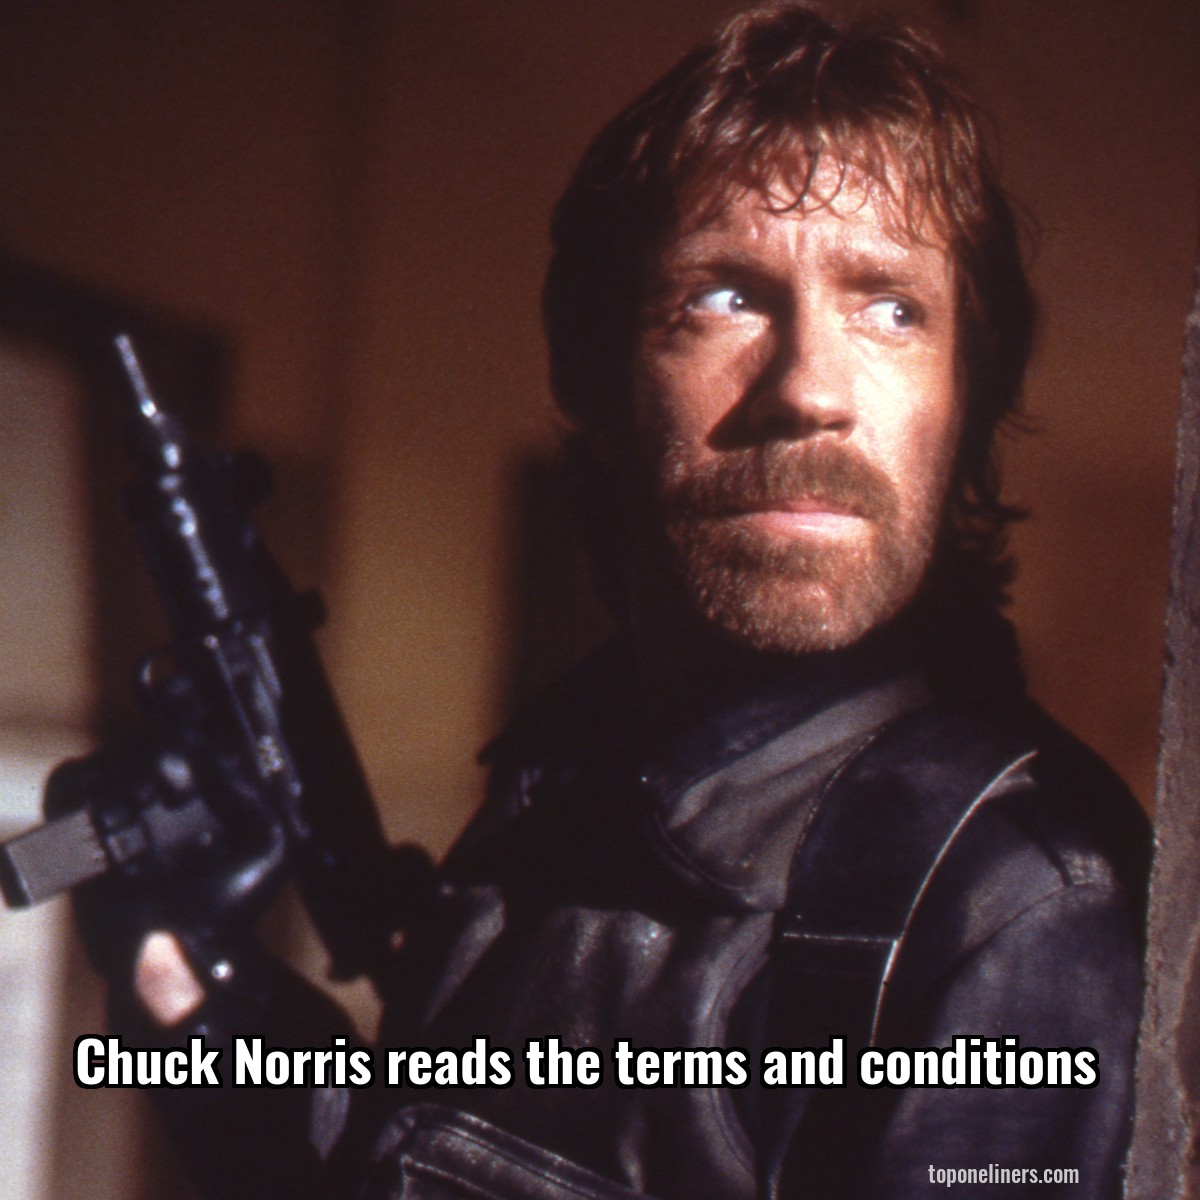 Chuck Norris reads the terms and conditions